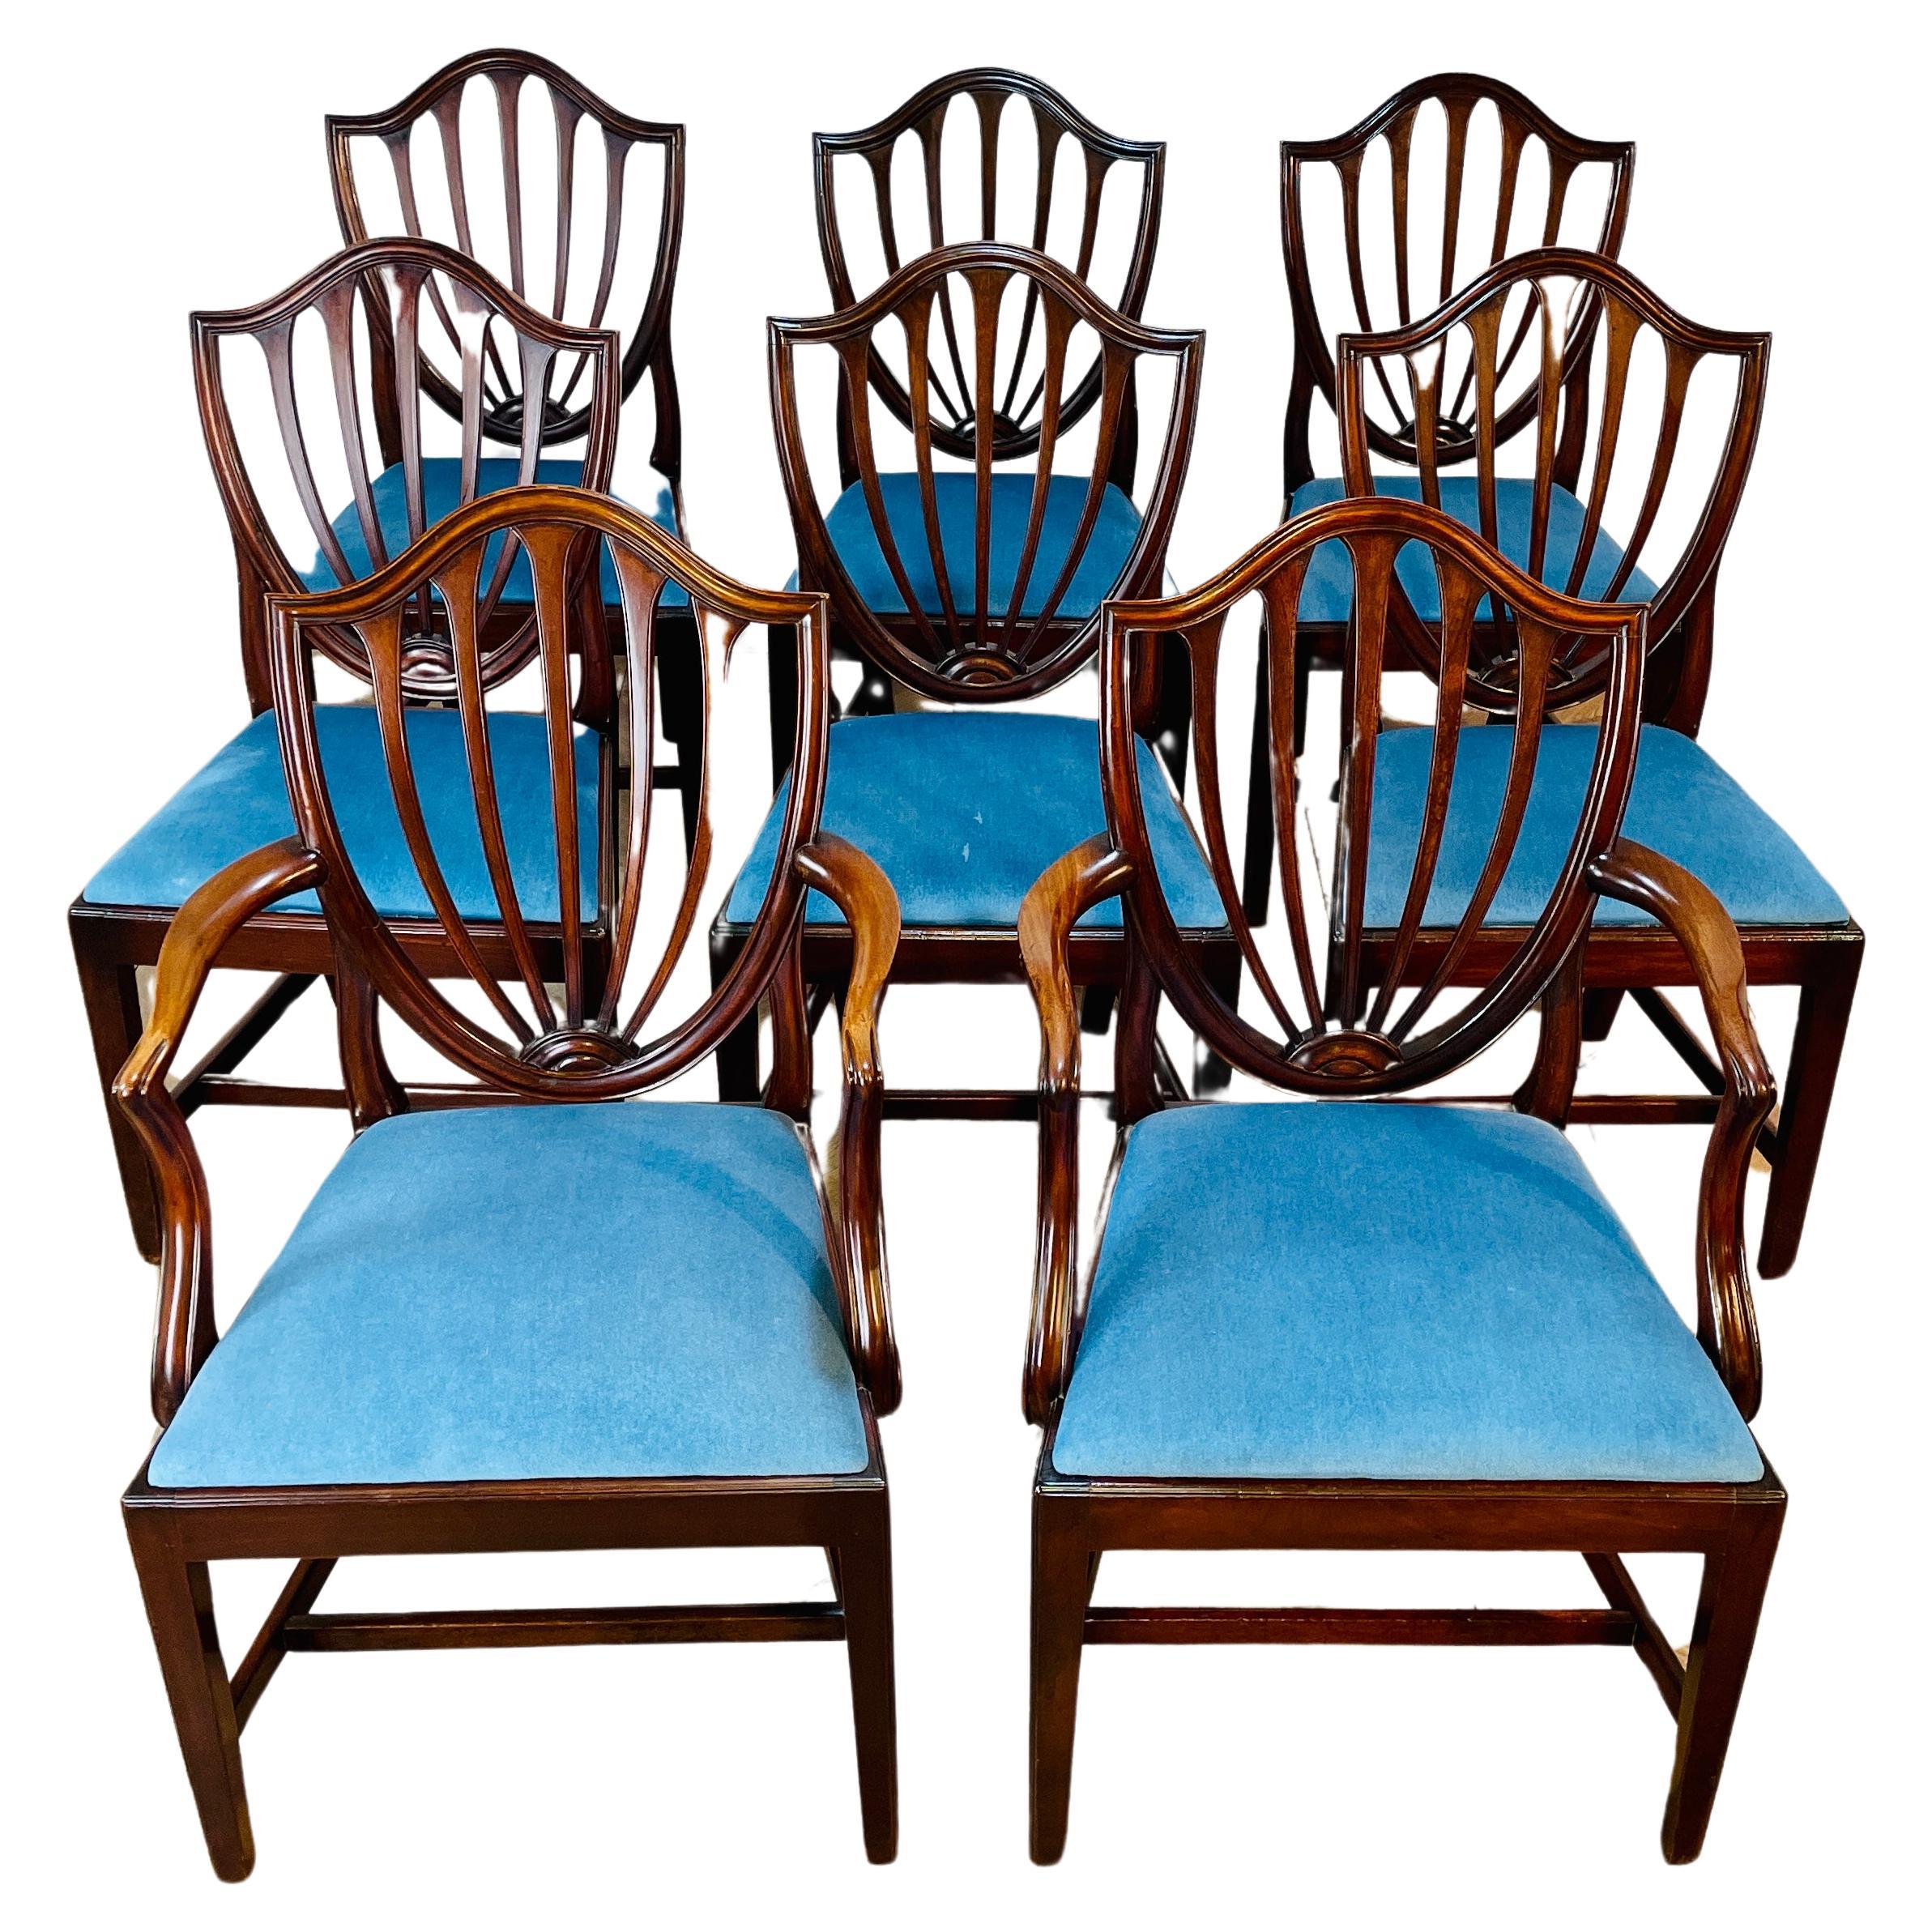 Antique Hepplewhite Style Shield Back Dining Chairs, Set of 8